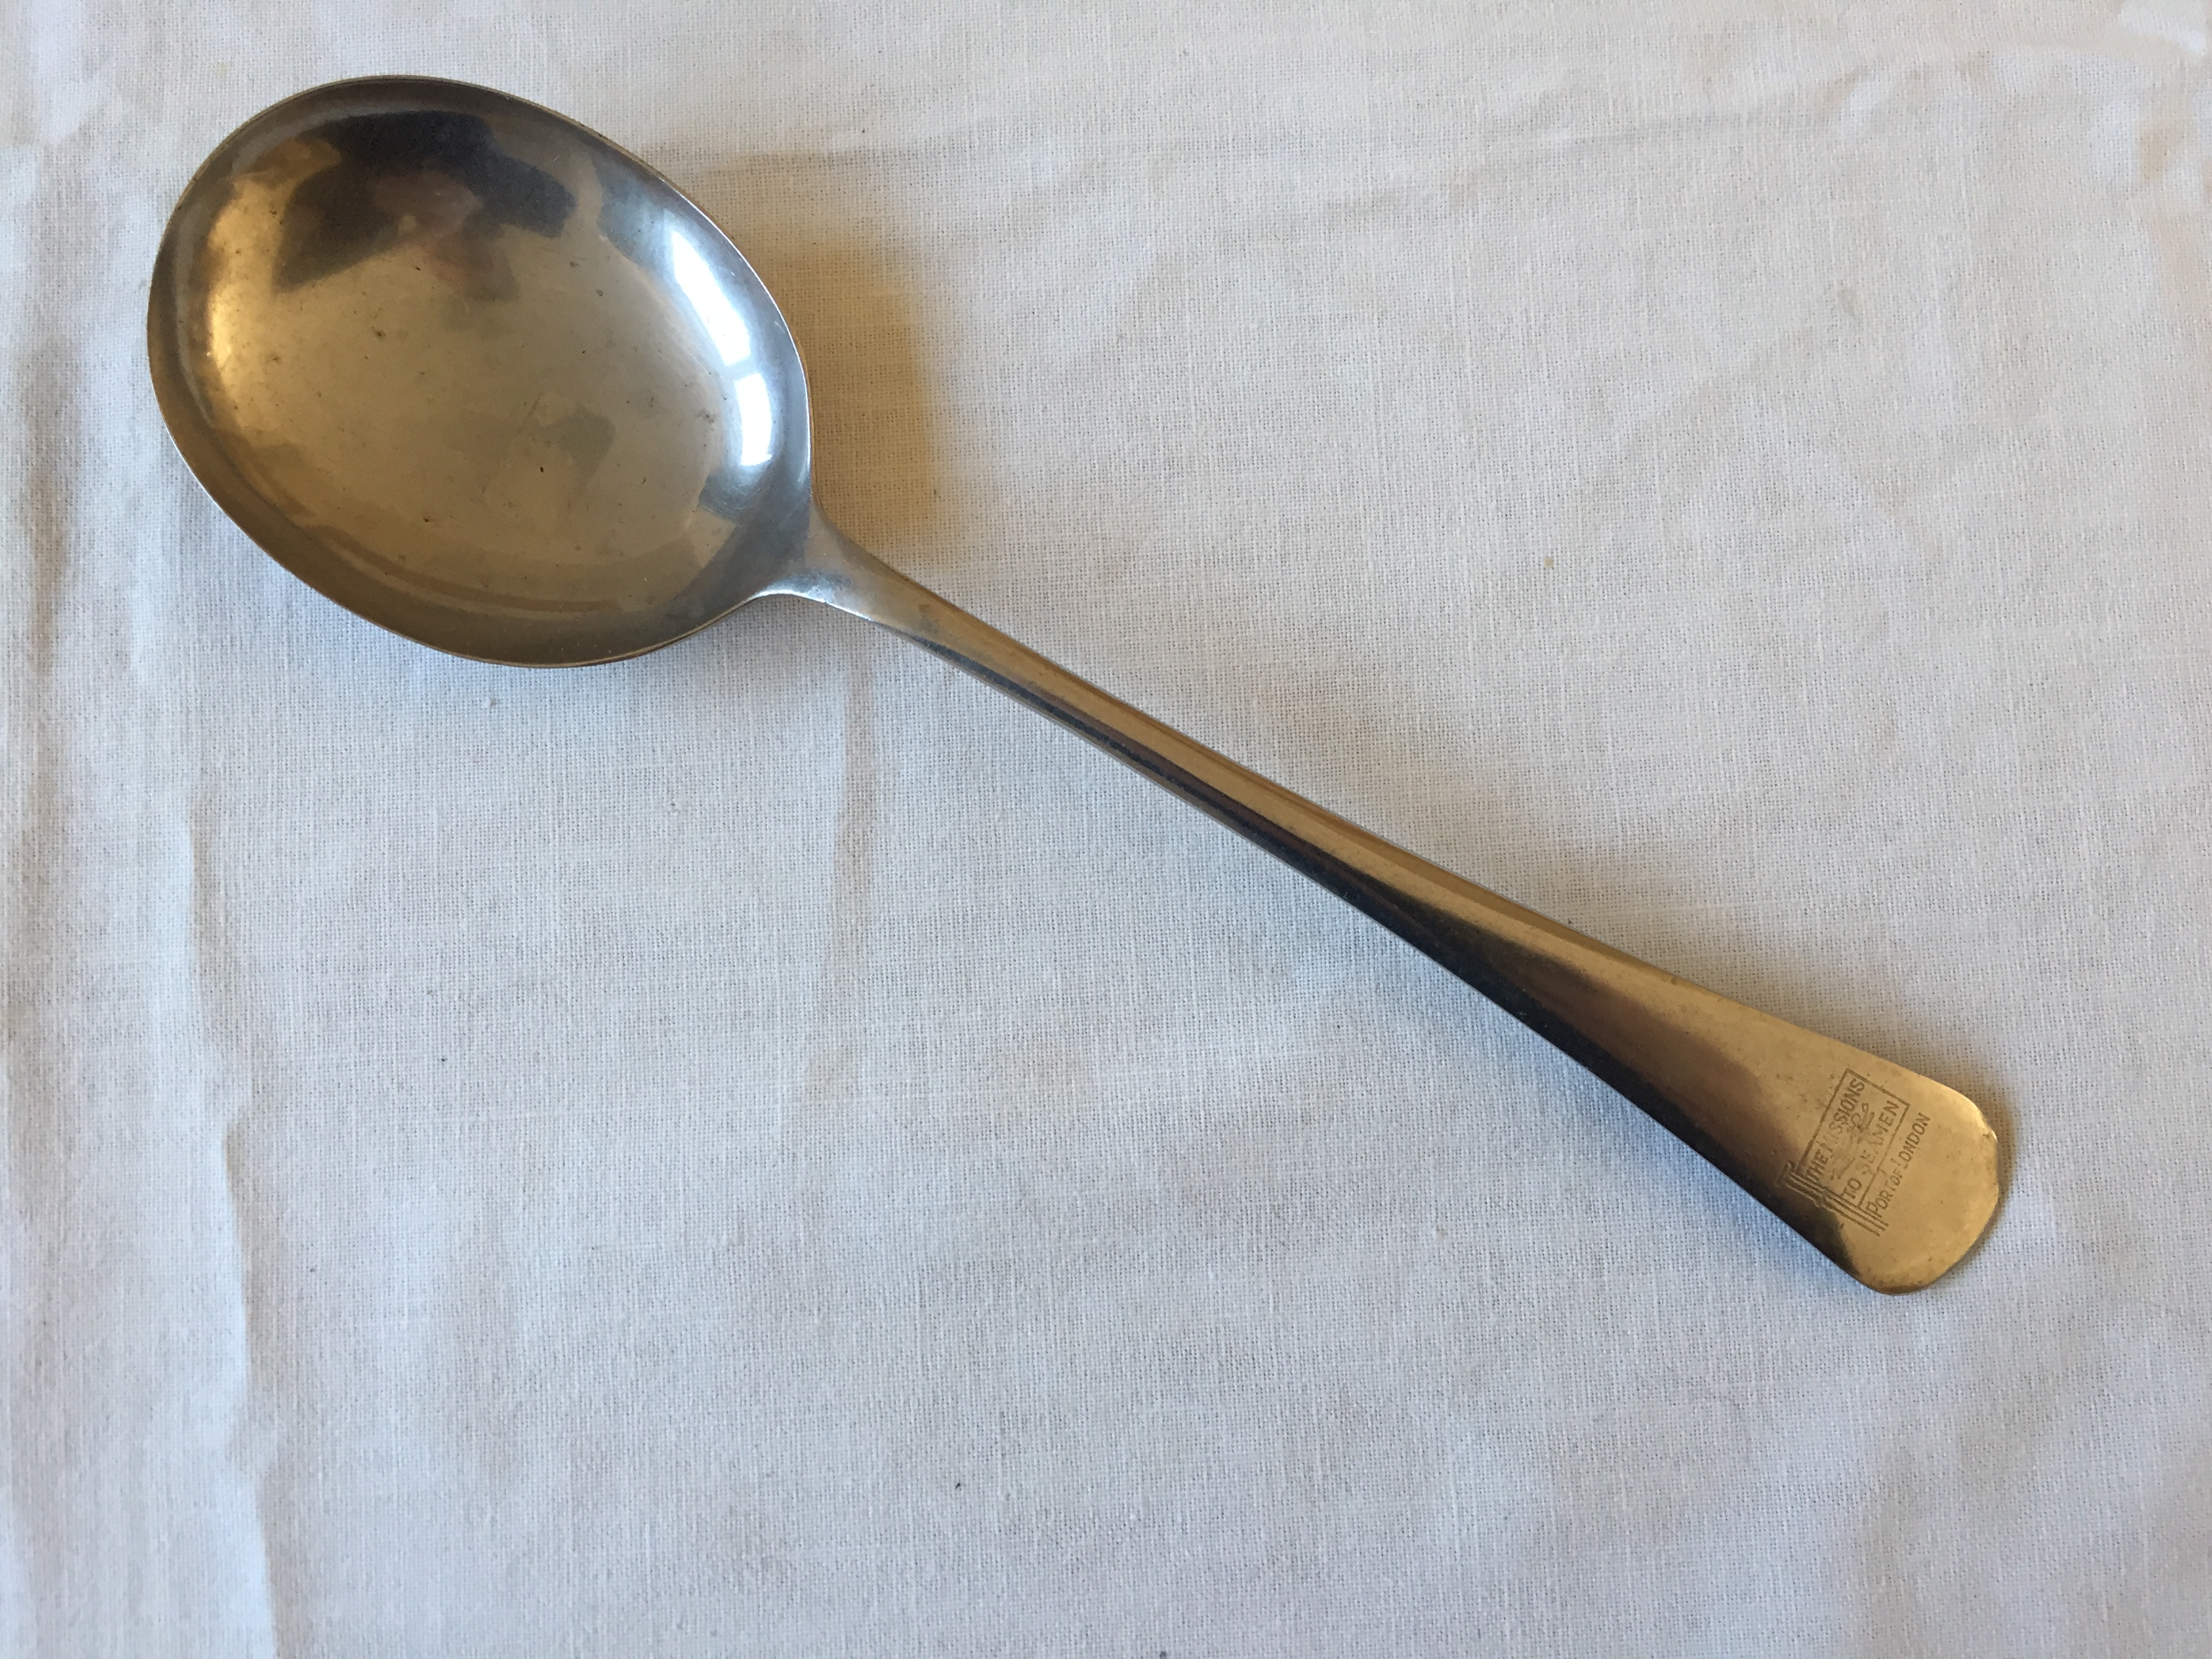 EARLY DESSERT/SOUP SPOON FROM THE PORT OF LONDON AUTHORITY